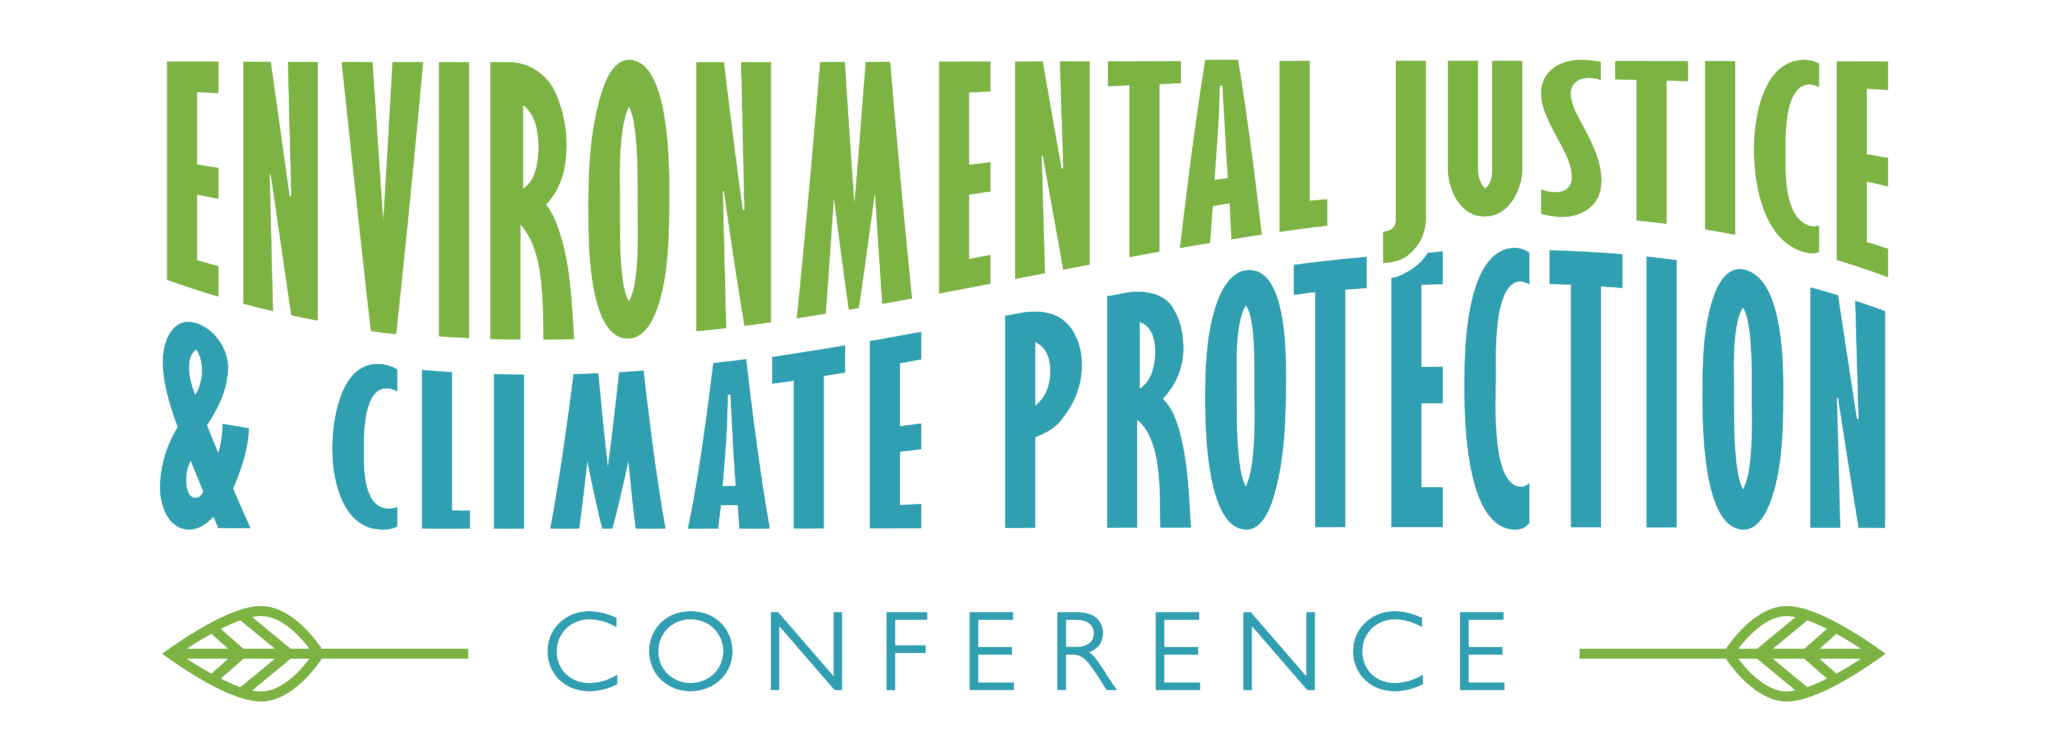 Environmental Justice & Climate Protection Conference